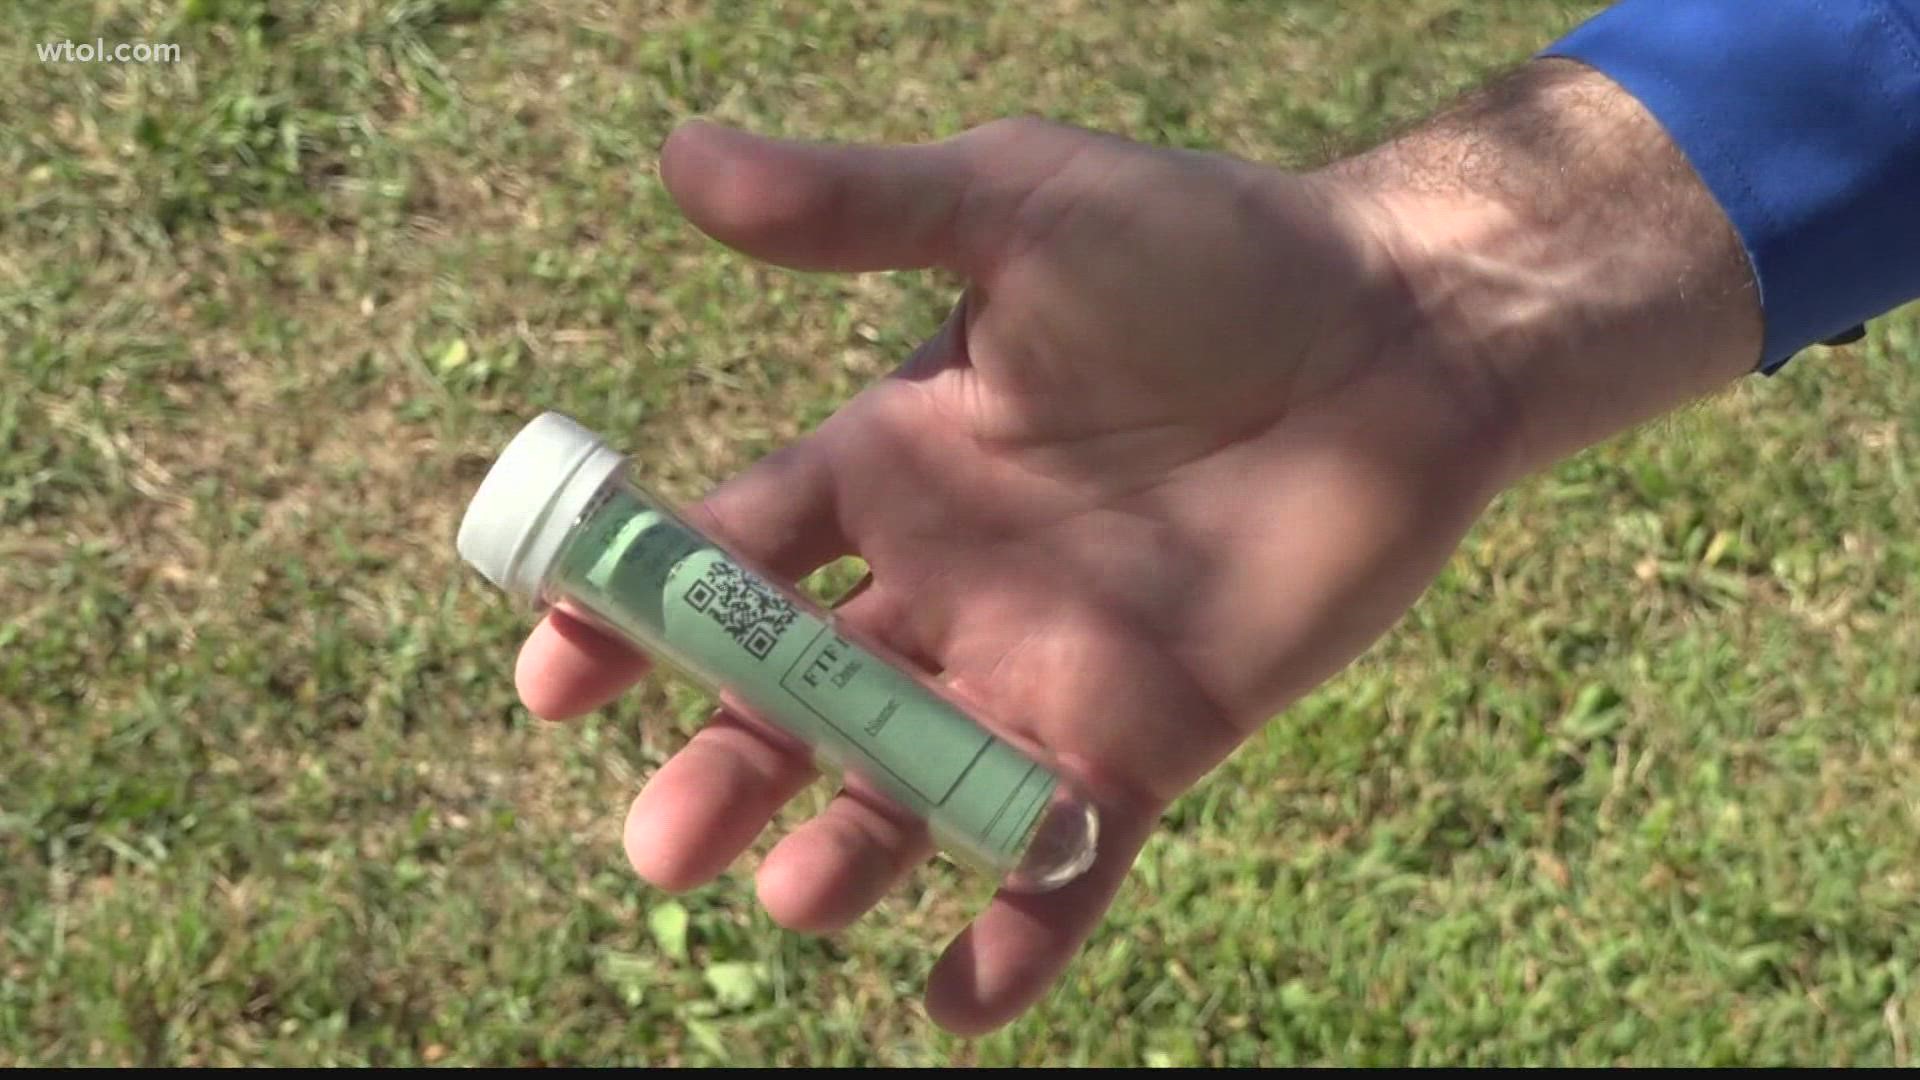 The first dedicated geocaching trail in northwest Ohio will offer 20 caches for people to find via GPS.